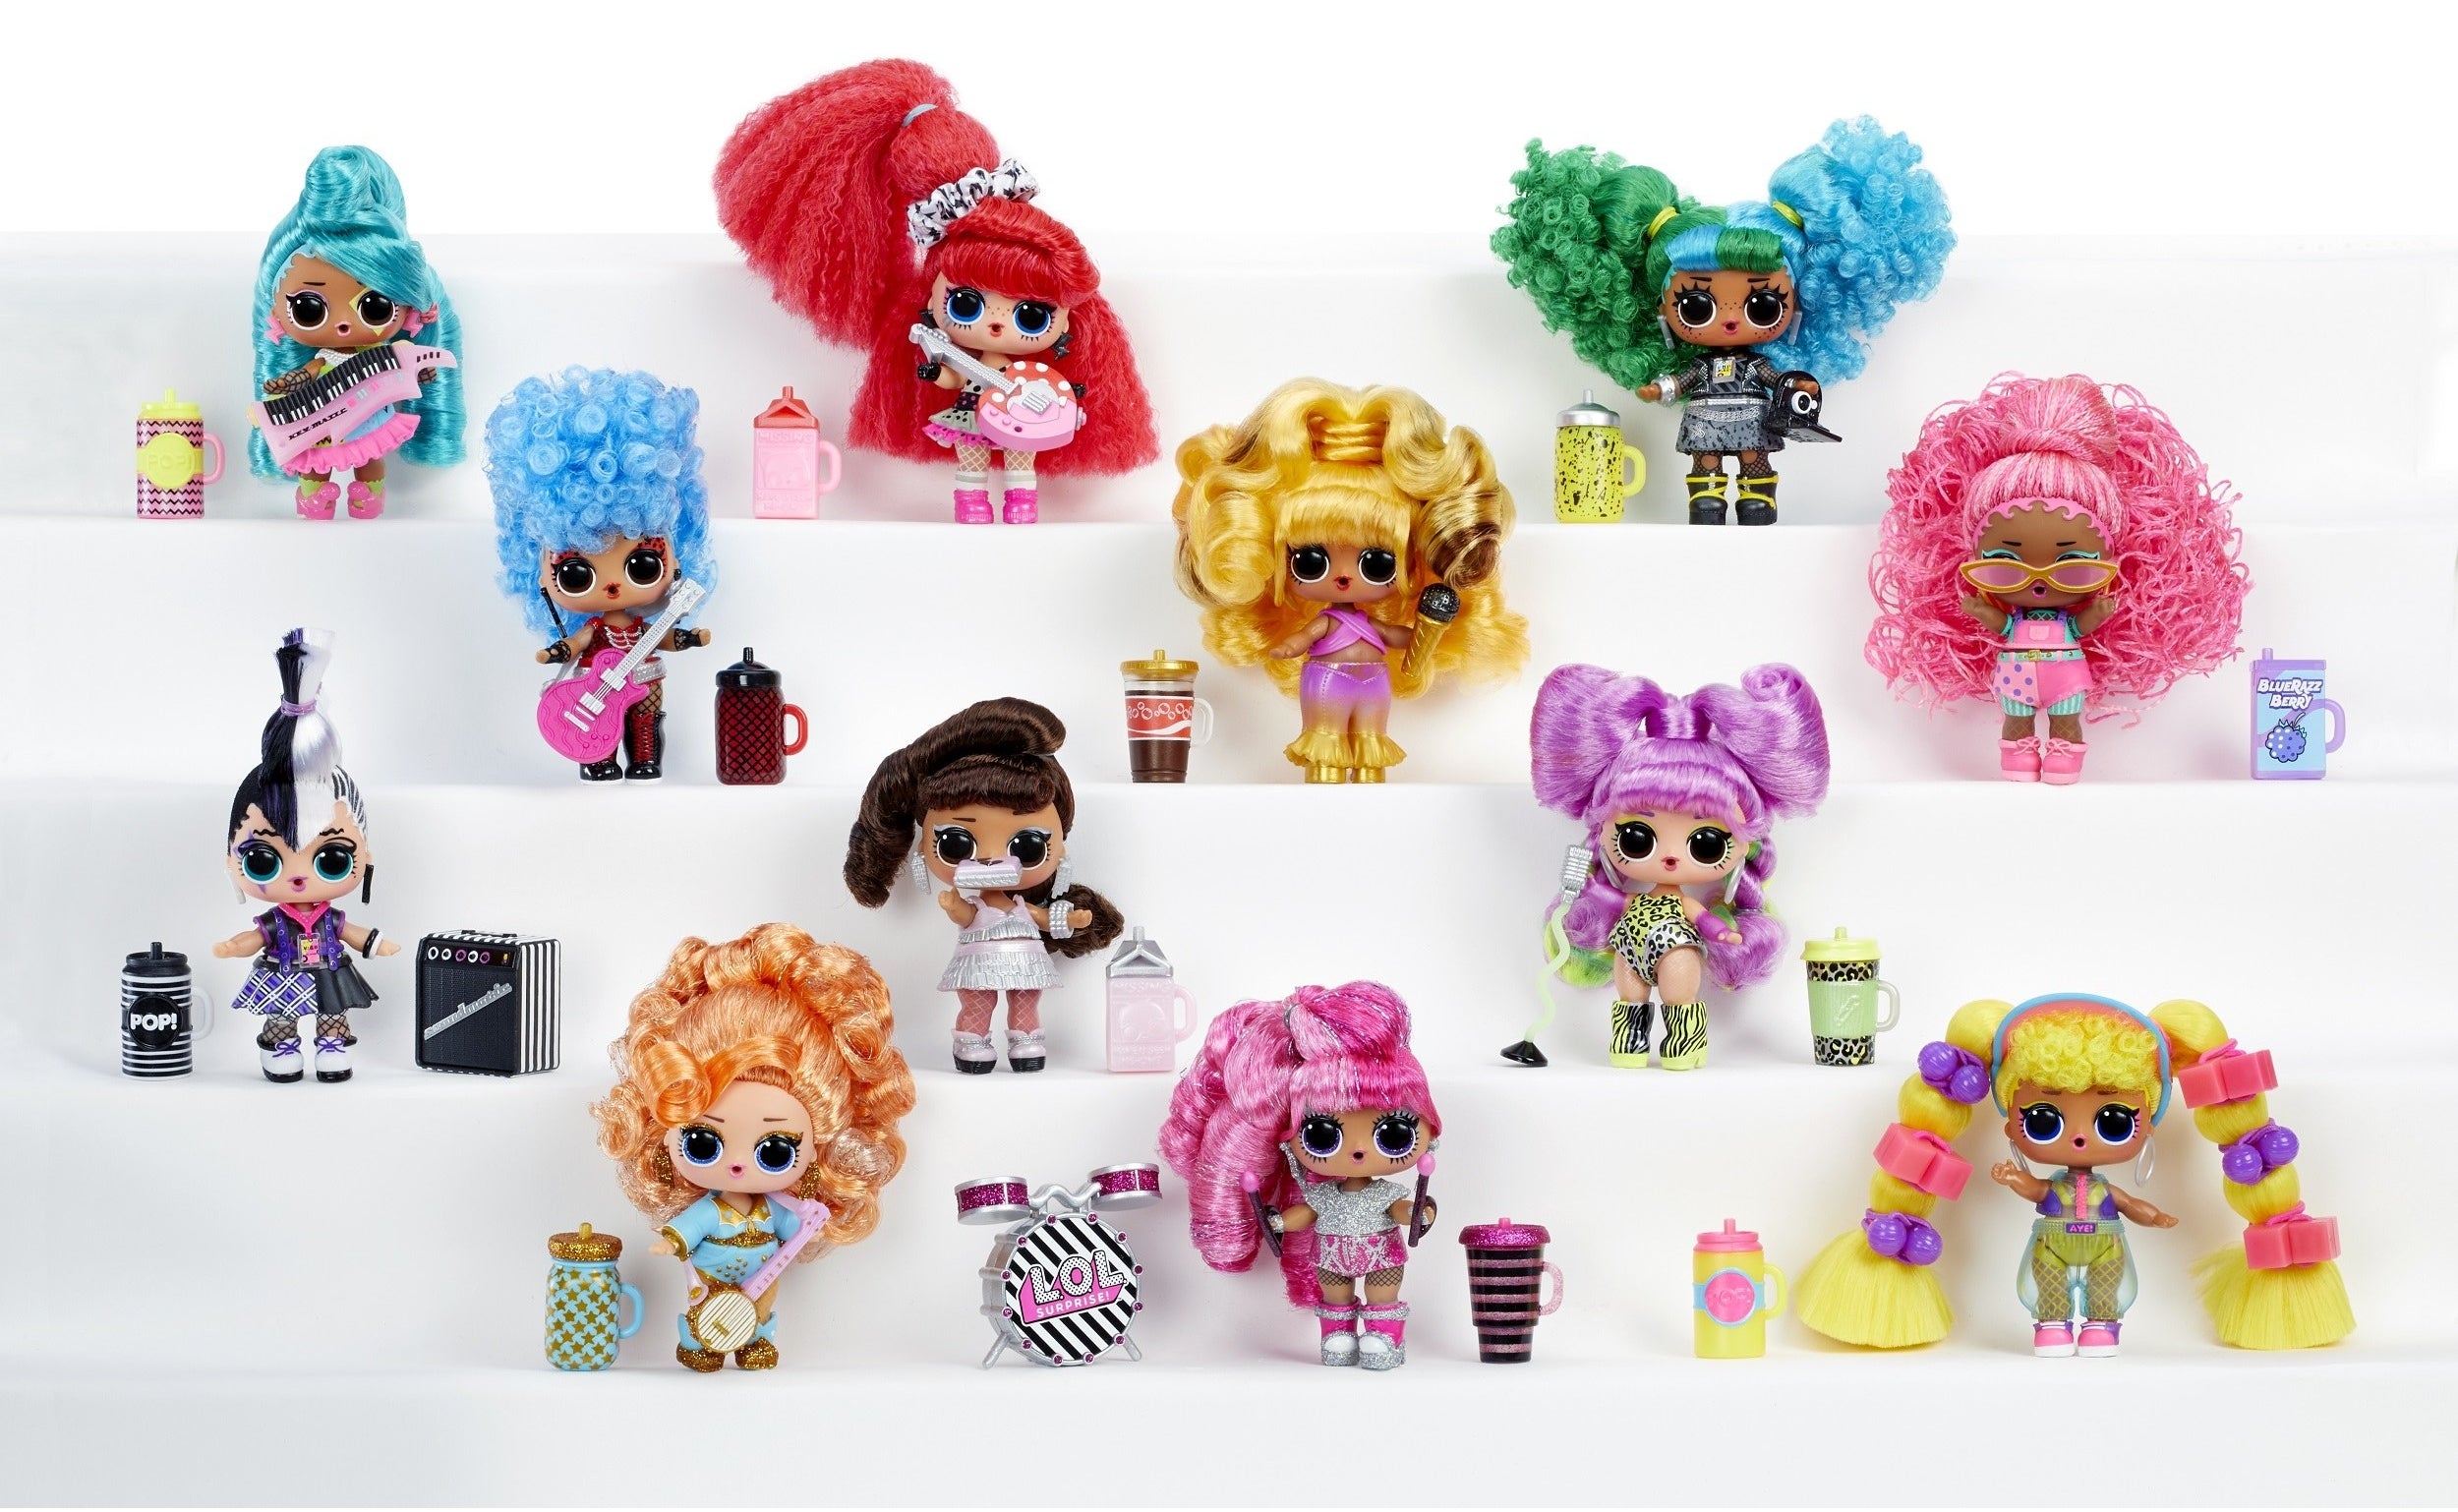 12 LOL surprise dolls with colorful hair